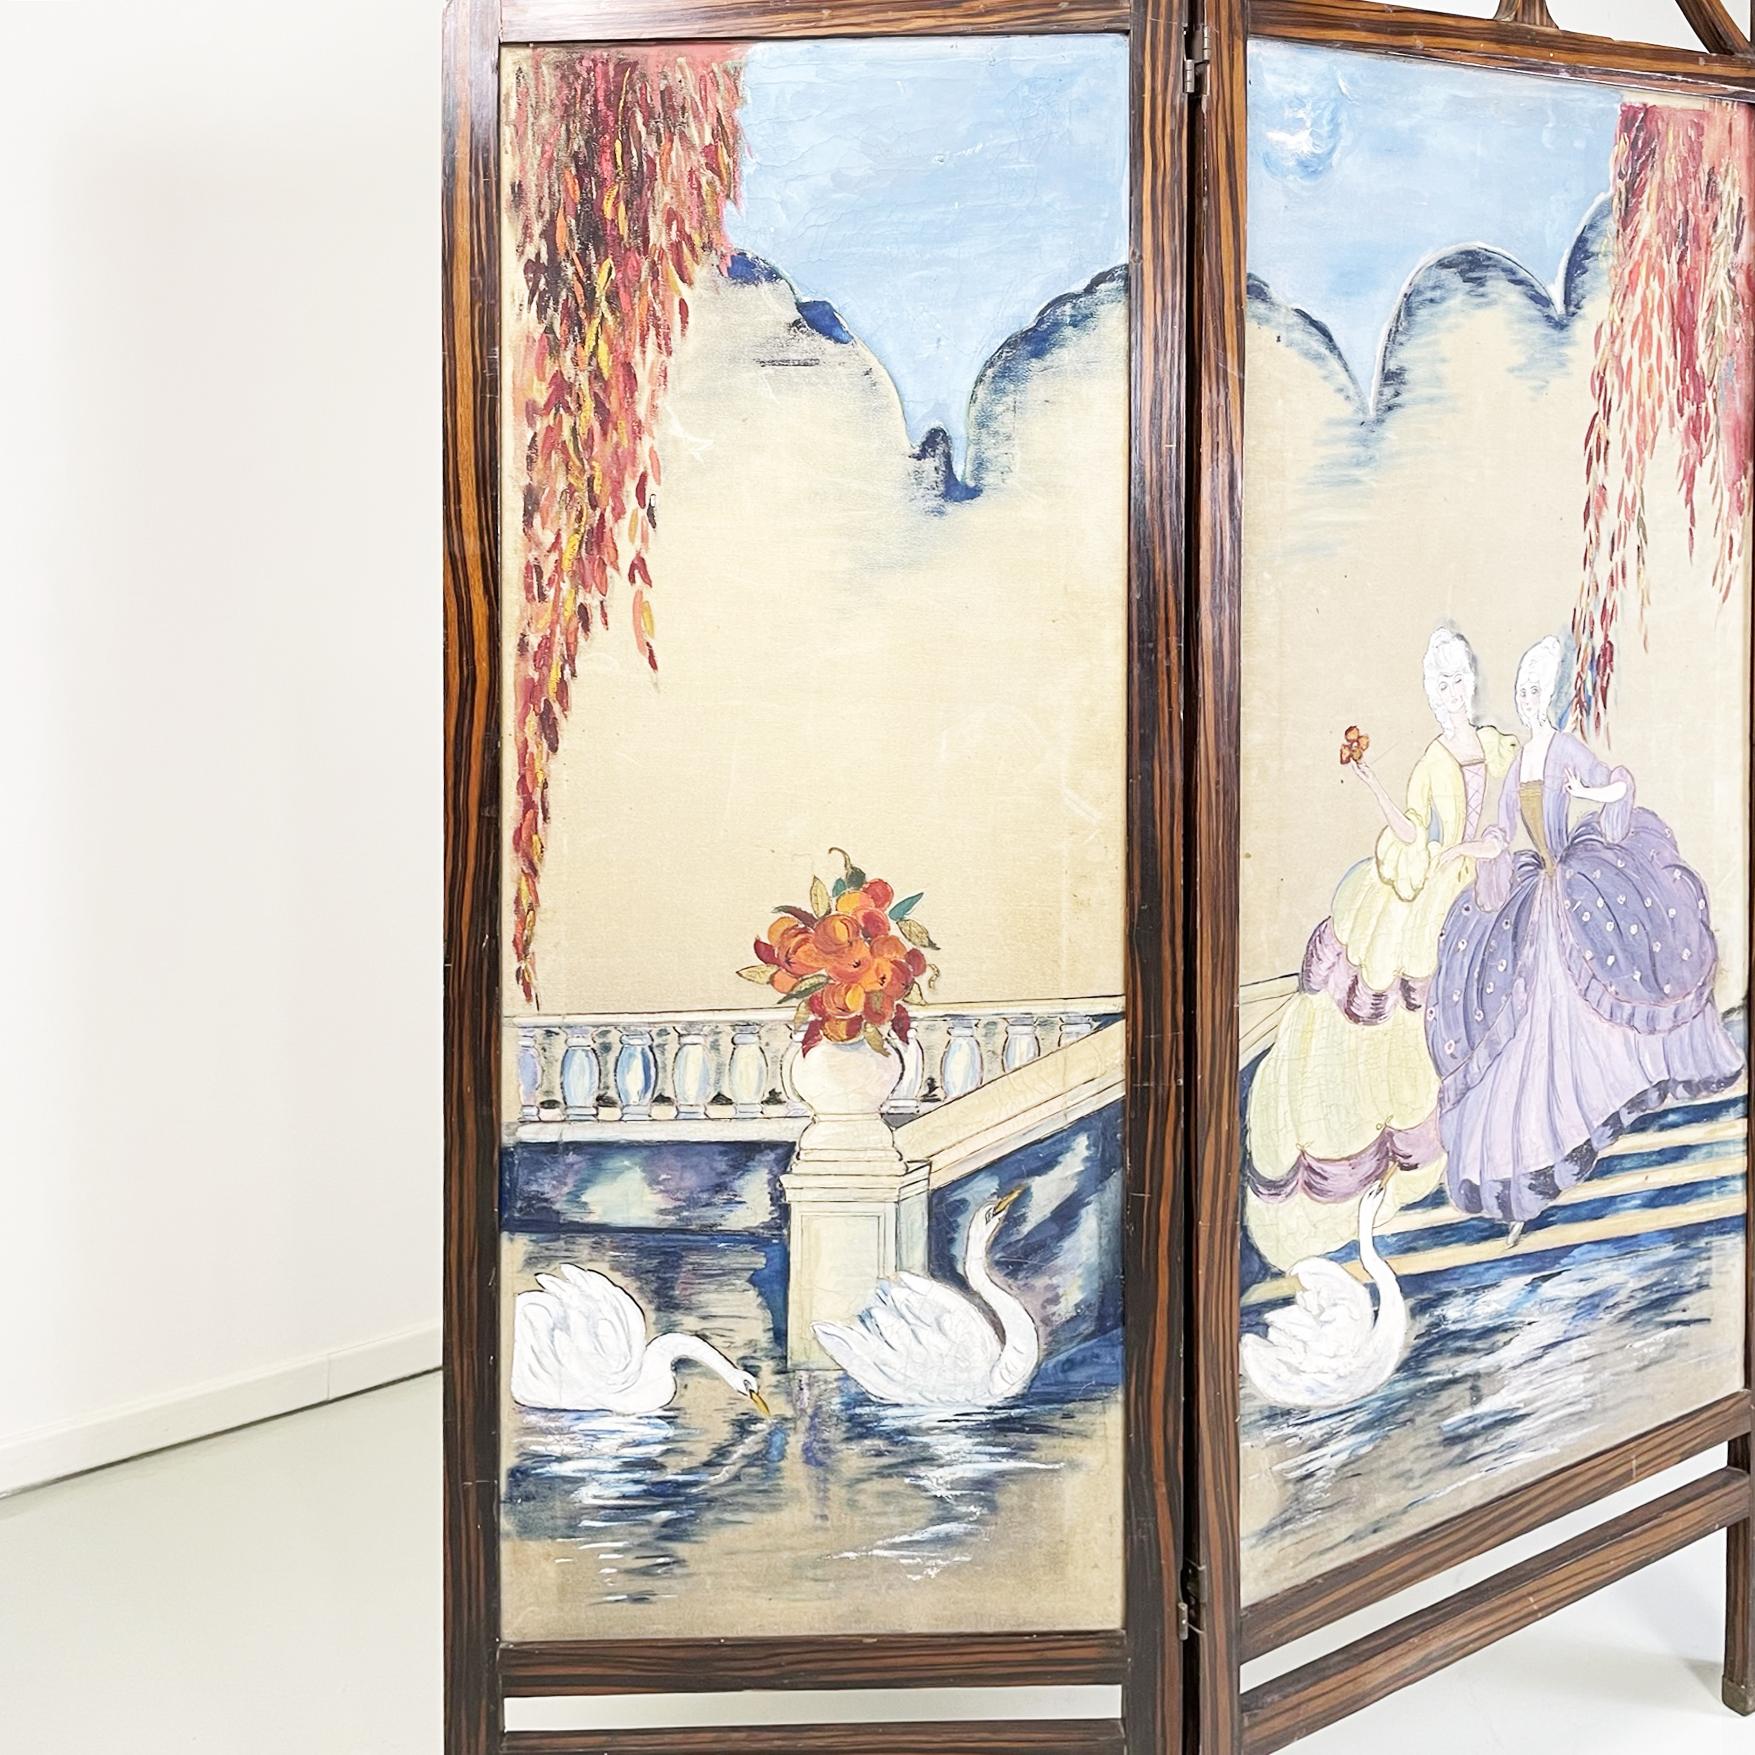 20th Century Italian Antique Three-Door Screen Hand Painted on Fabric and Wood, Early 1900s For Sale